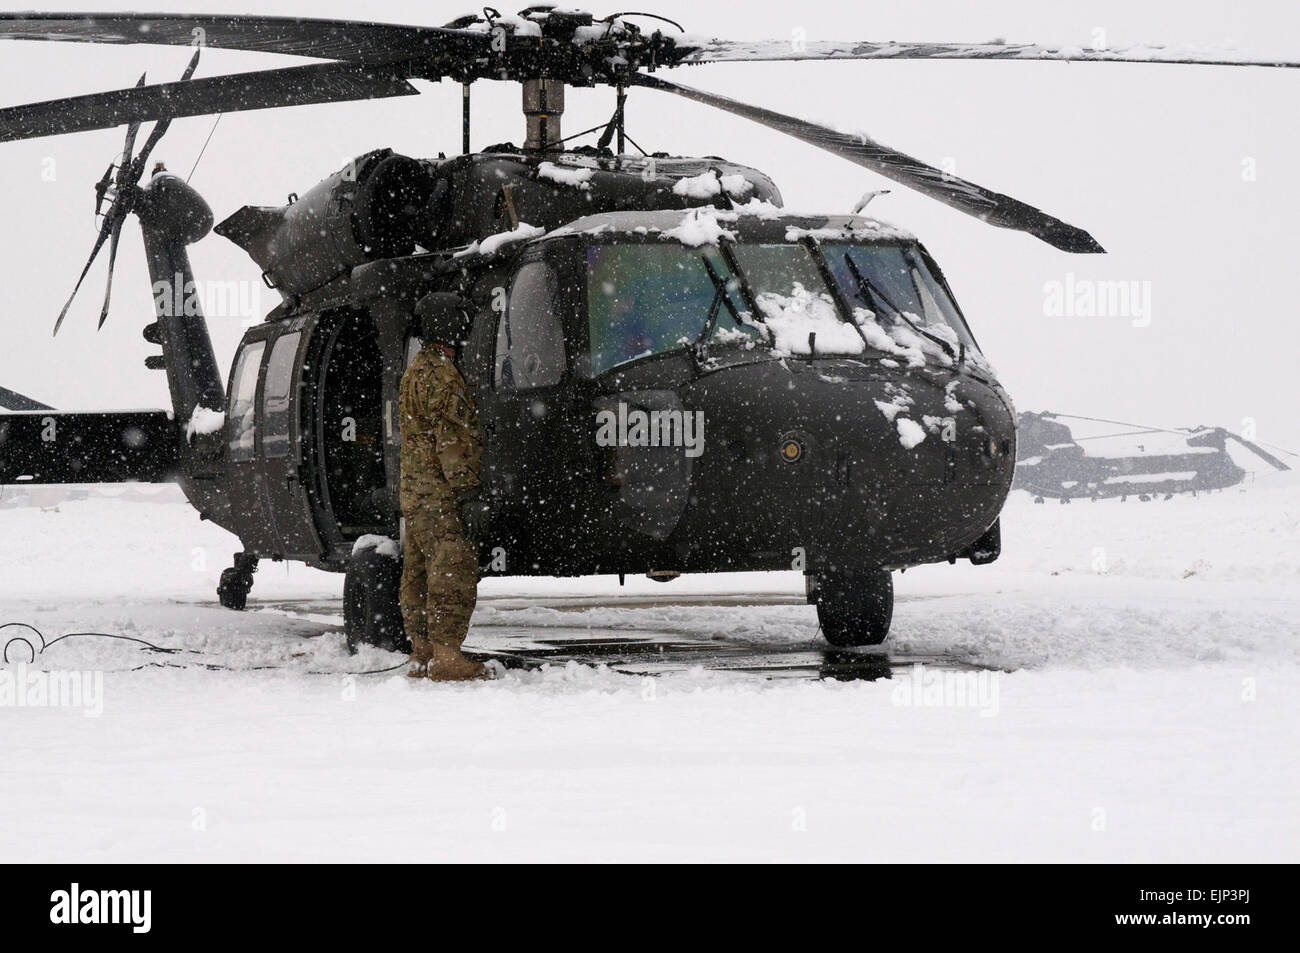 Spc. Rodney Pentecost, a Task Force Talon crew chief from Greens Fork, In., assist pilots while they run through pre-flight checks during a snow storm on Bagram Airfield, Afghanistan, Jan 22.  This is the second major snow storm to hit Bagram this year, and is expected to continue for a few days.  Sgt. 1st Class Eric Pahon, Task Force Poseidon Public Affairs Stock Photo